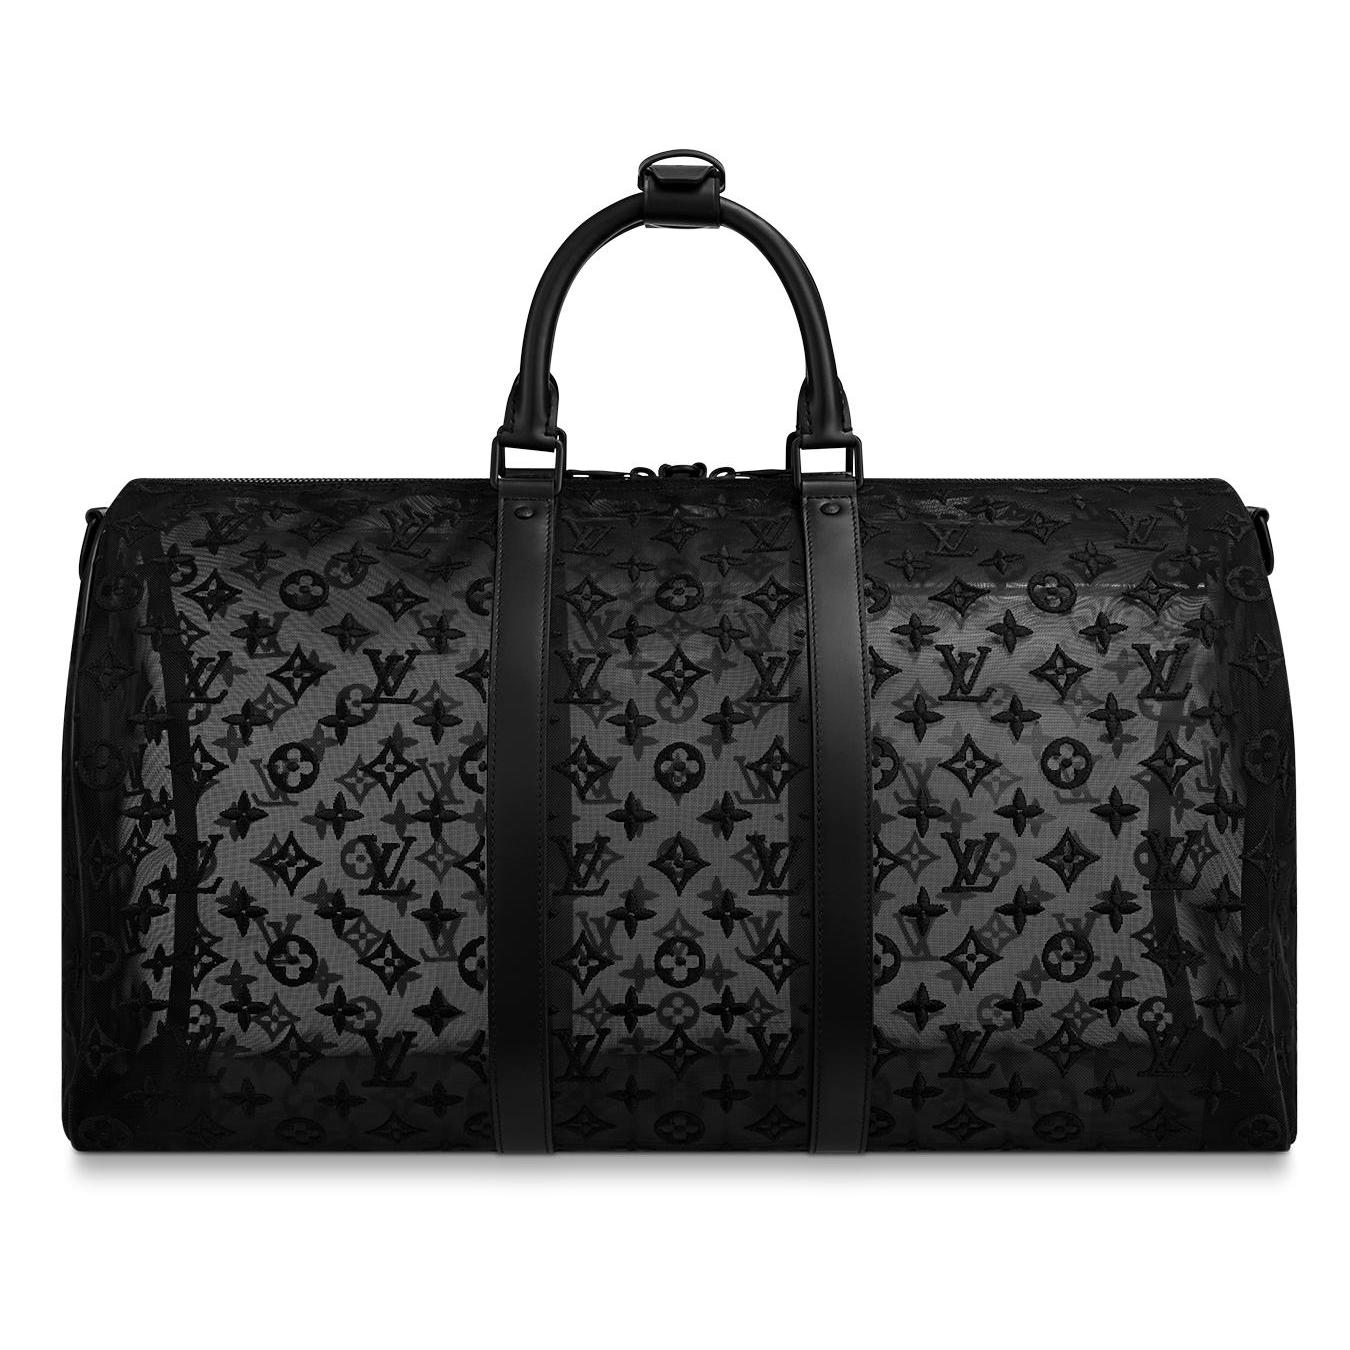 Louis Vuitton Monogram See Through Keepall 50 Bag Reference Guide ...